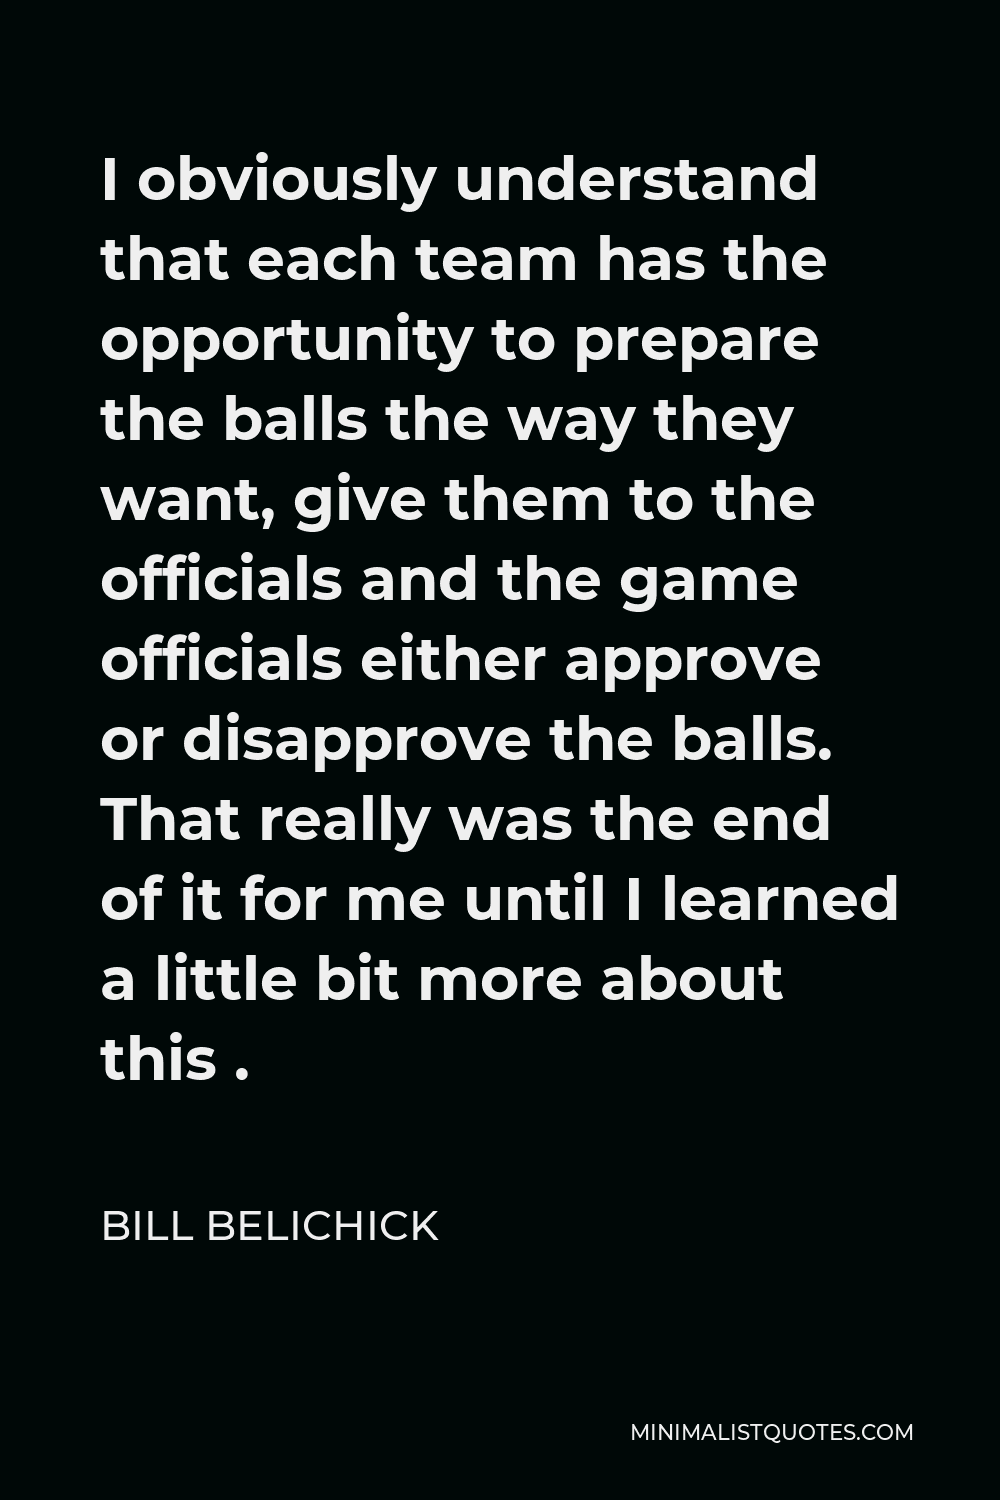 Bill Belichick Quote - I obviously understand that each team has the opportunity to prepare the balls the way they want, give them to the officials and the game officials either approve or disapprove the balls. That really was the end of it for me until I learned a little bit more about this .